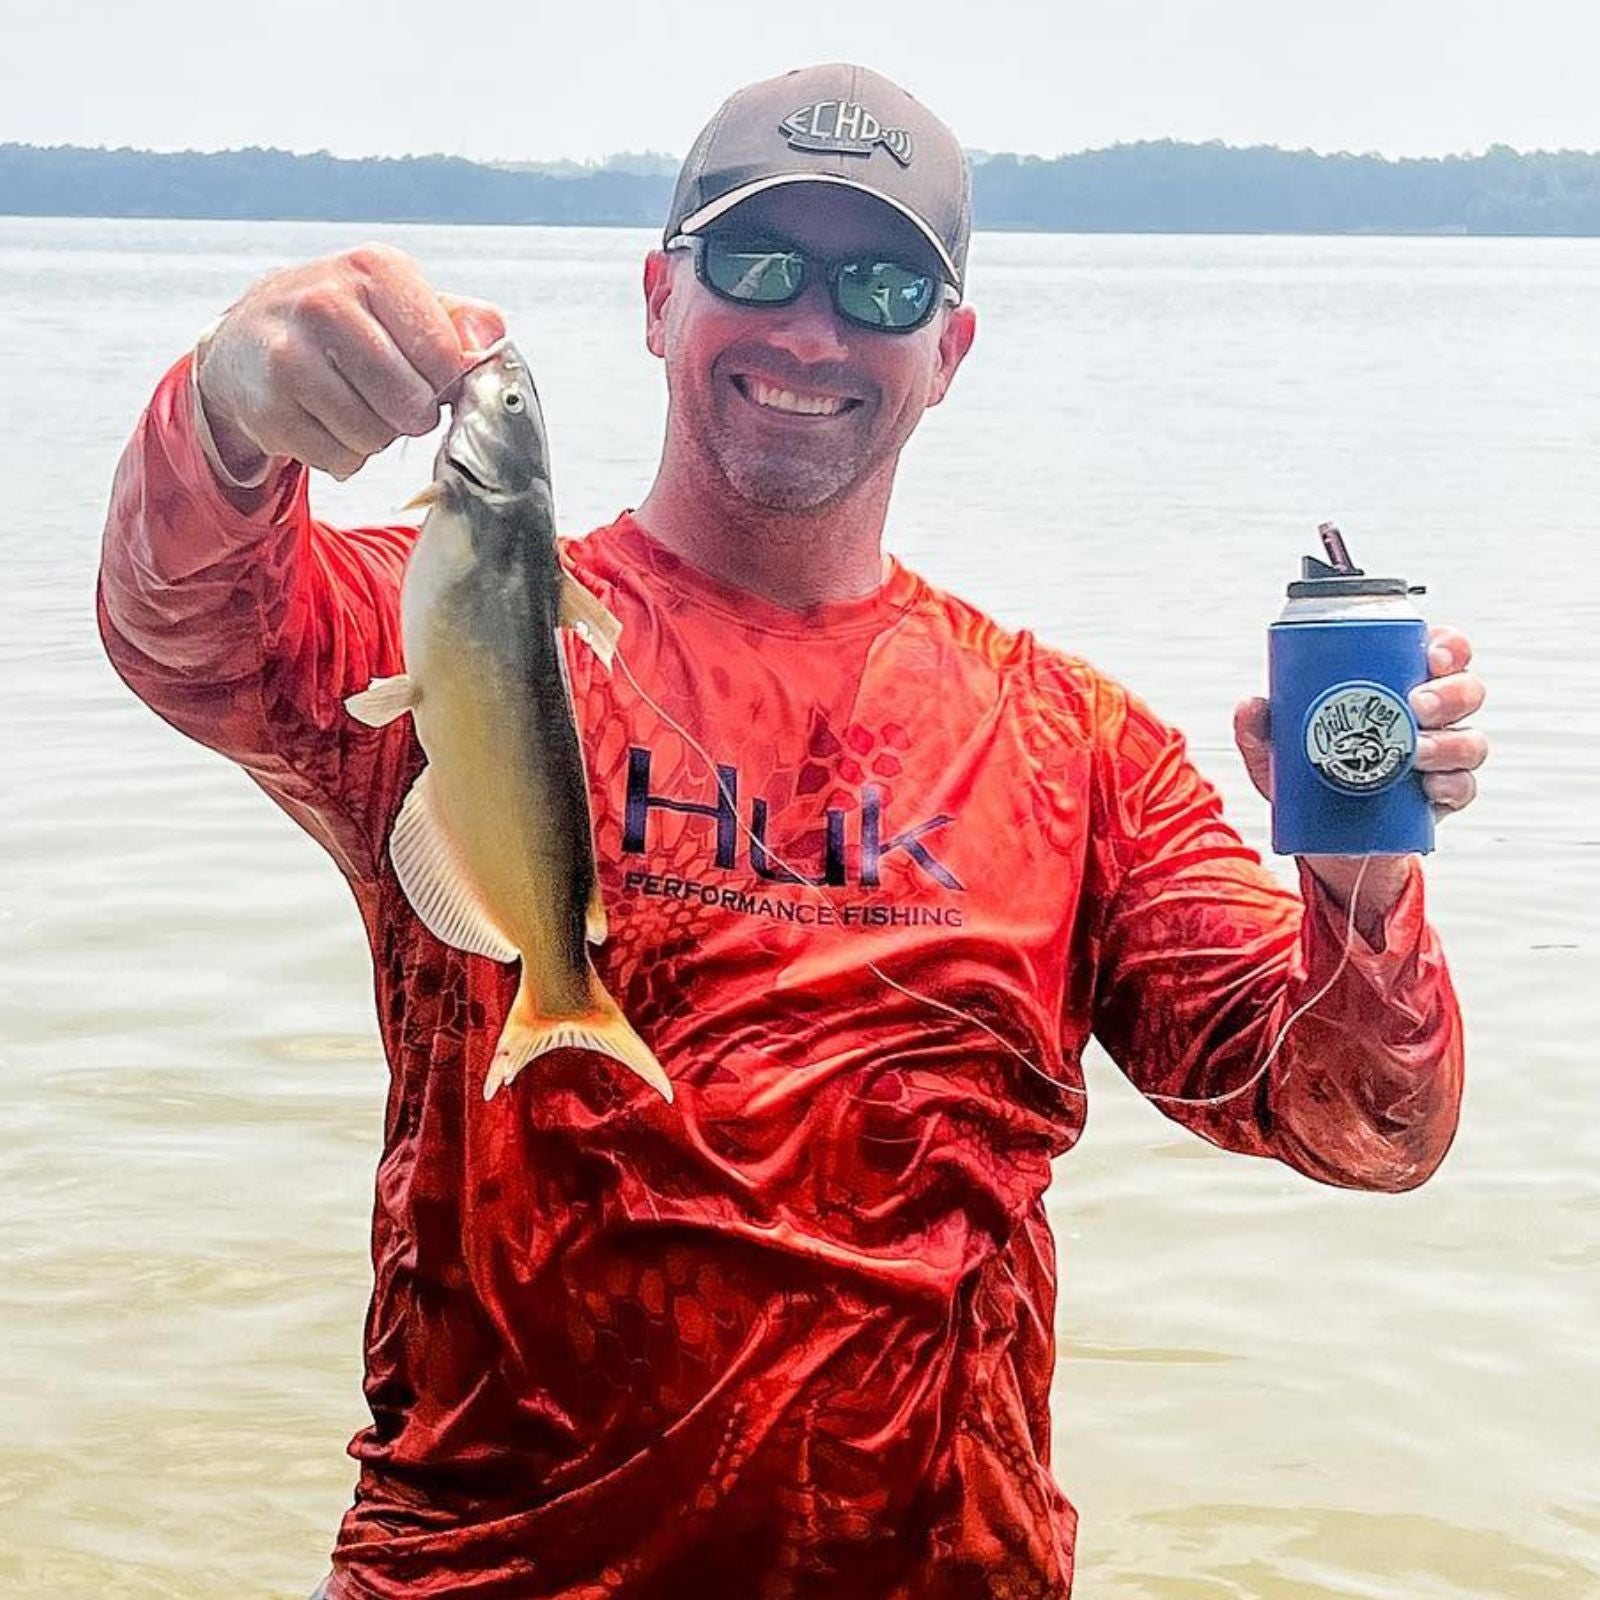 Chill-N-Reel Fishing Can Cooler with Hand Line Reel Attached | Hard Shell Drink Holder Fits Any Standard Insulator Sleeve or Coozie | Unique Fun